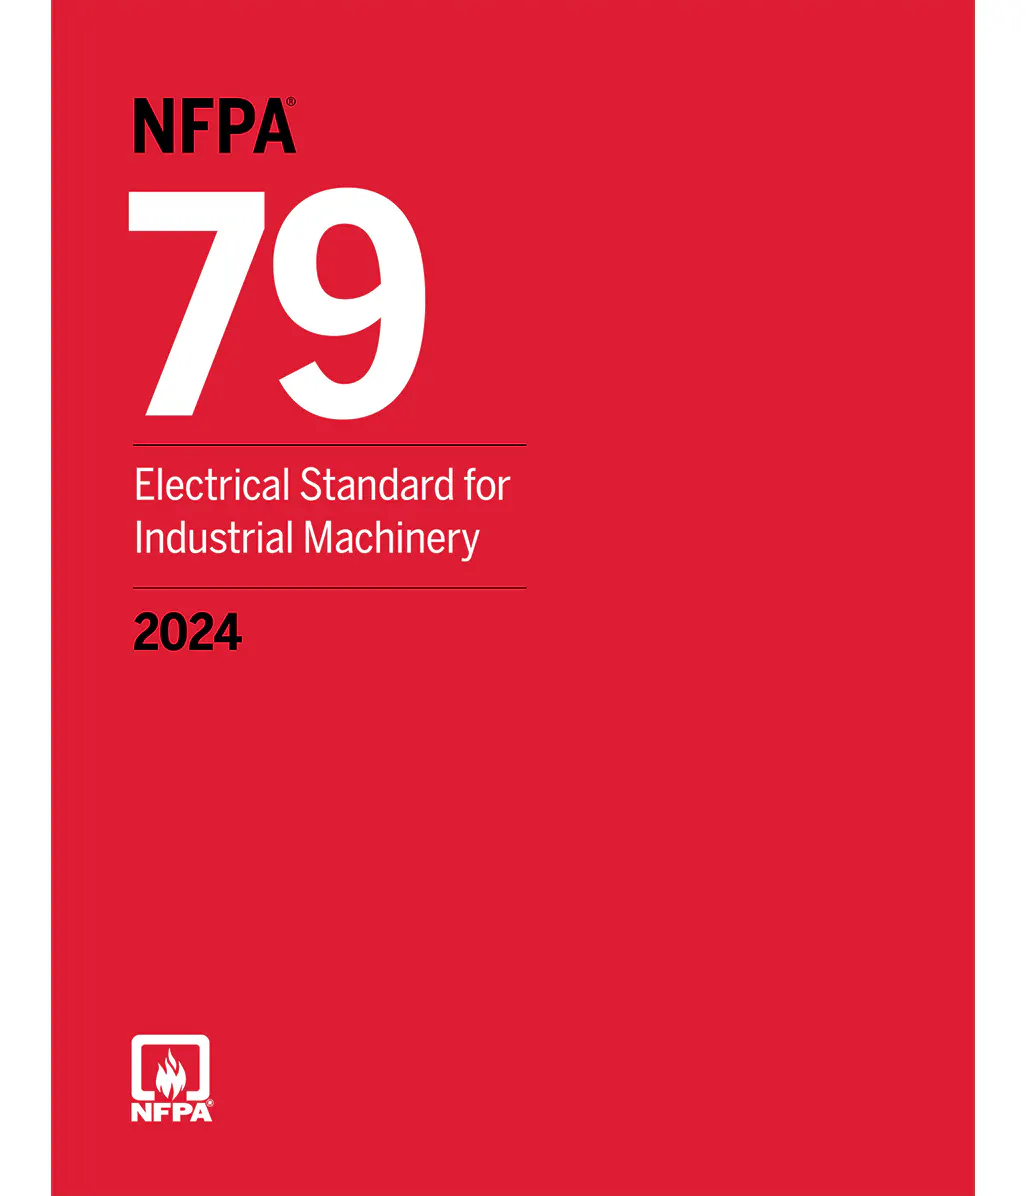 NFPA 79: Electrical Standard for Industrial Machinery 2024